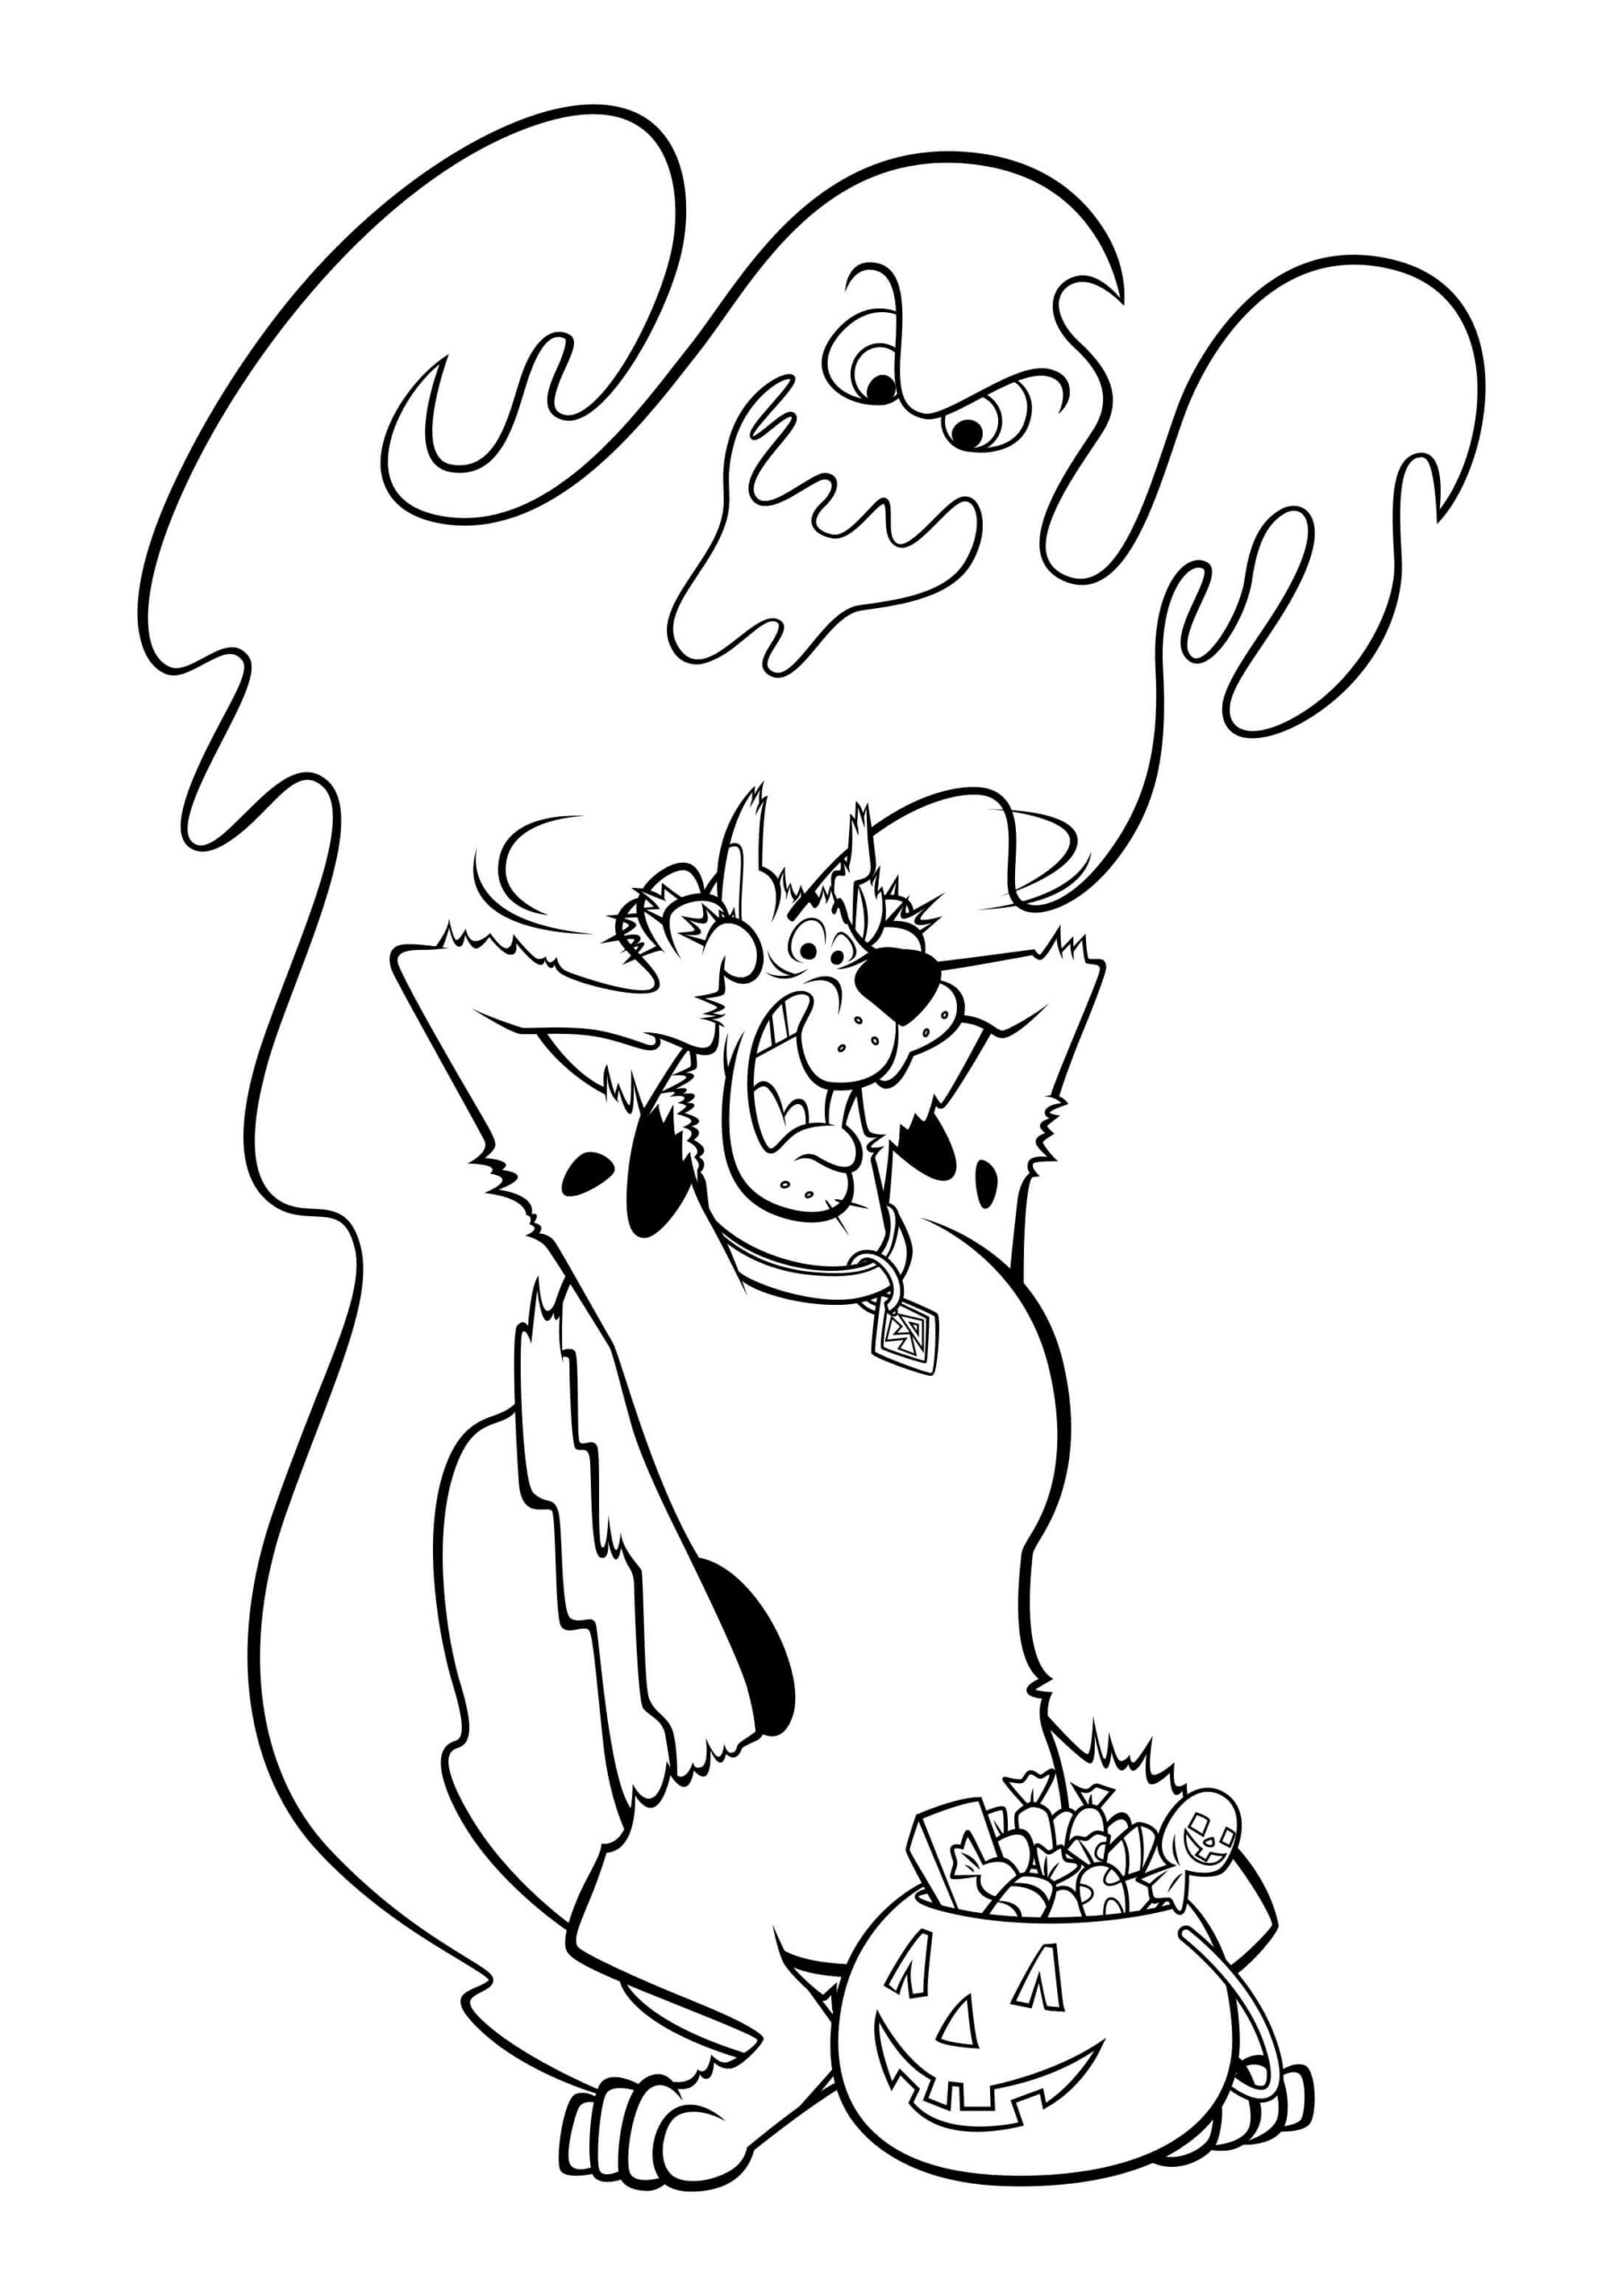 Ghost With Scooby-Doo In Halloween coloring page - Download, Print or ...